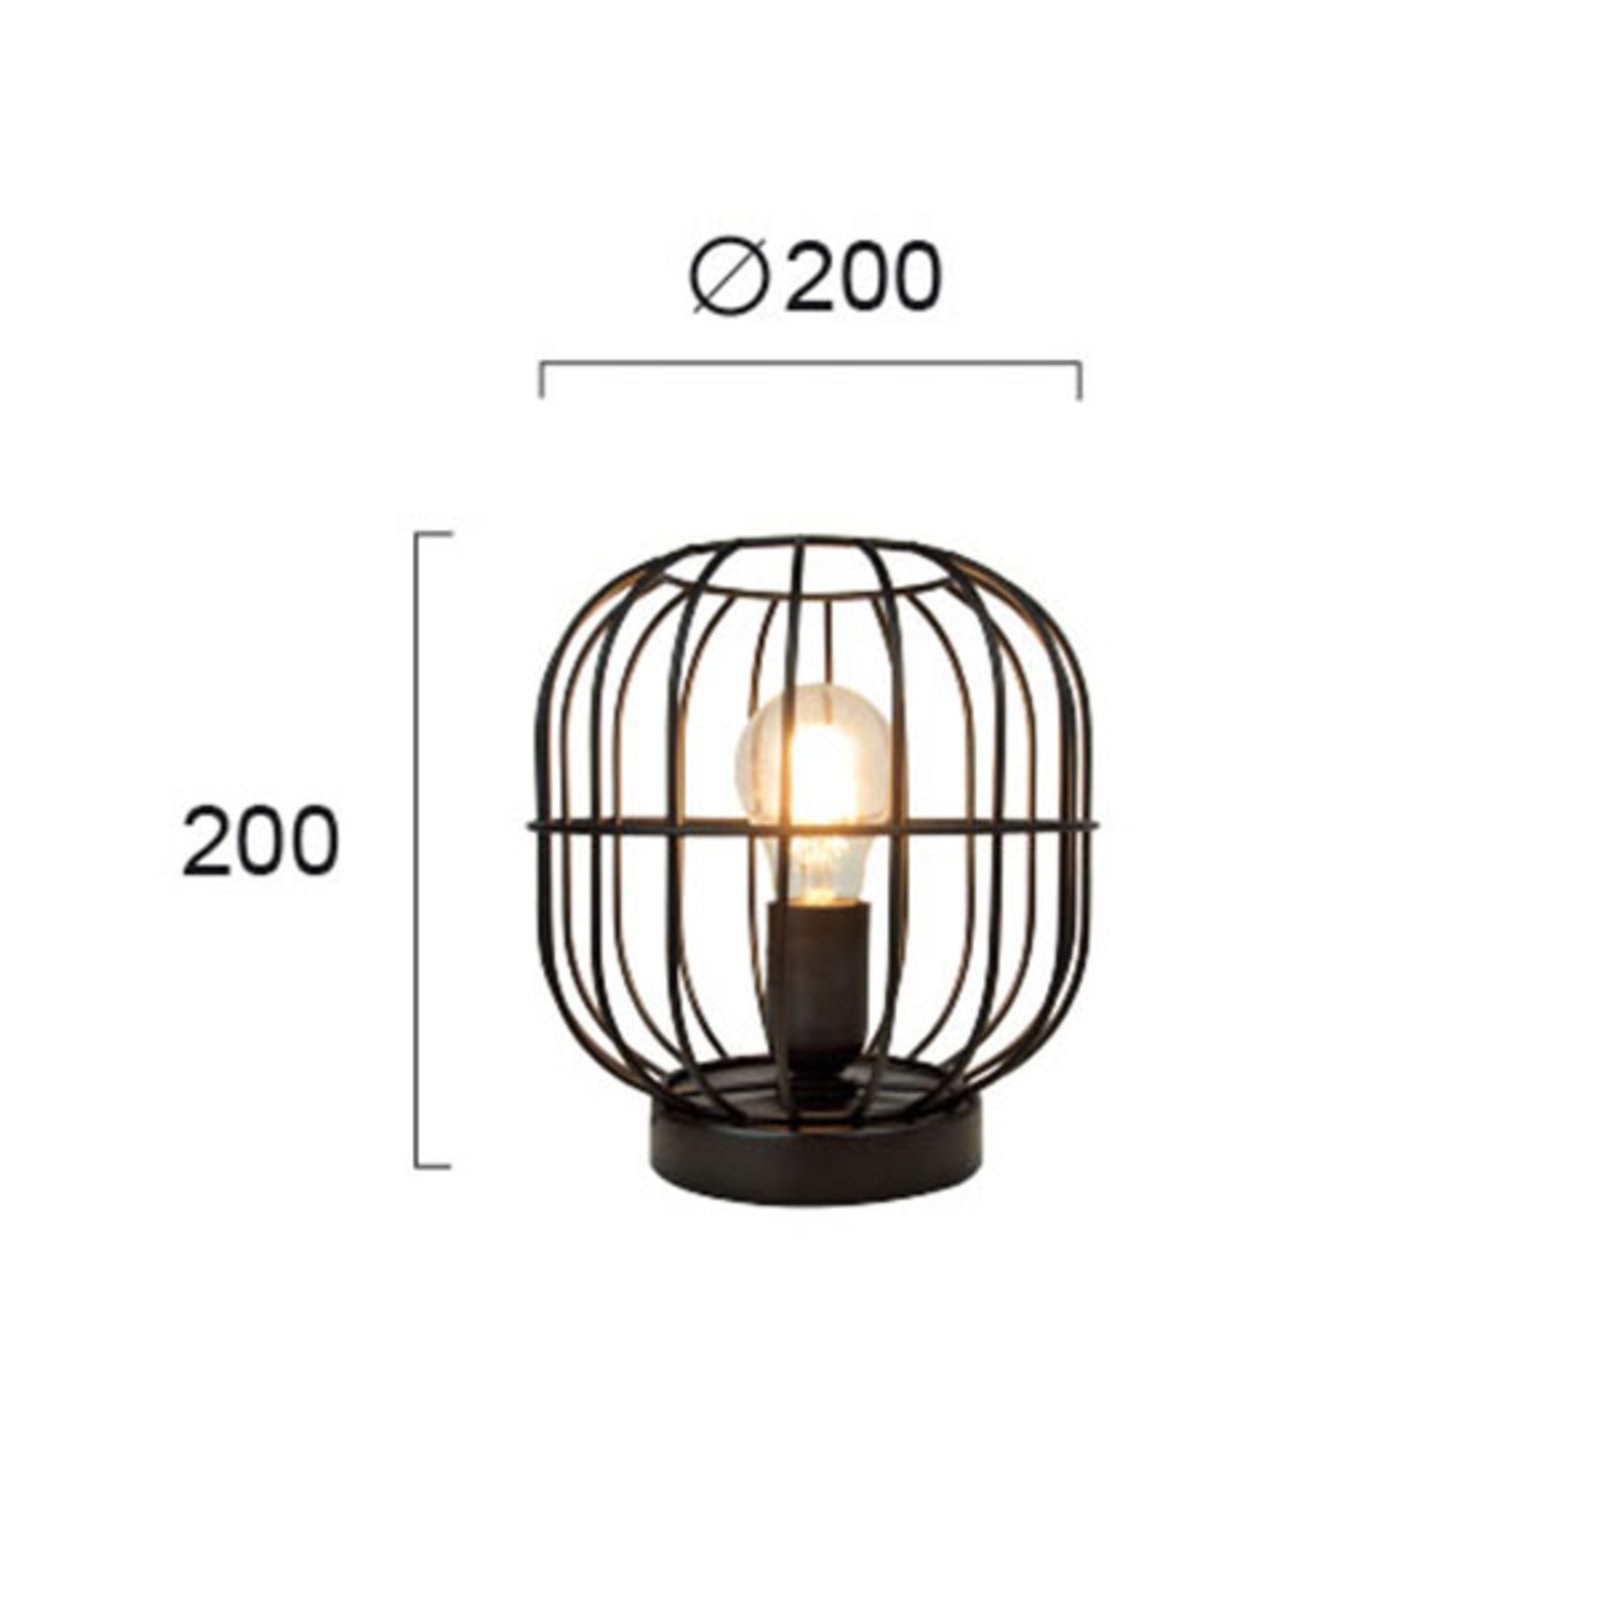 Zenith table lamp with a cage shape, black